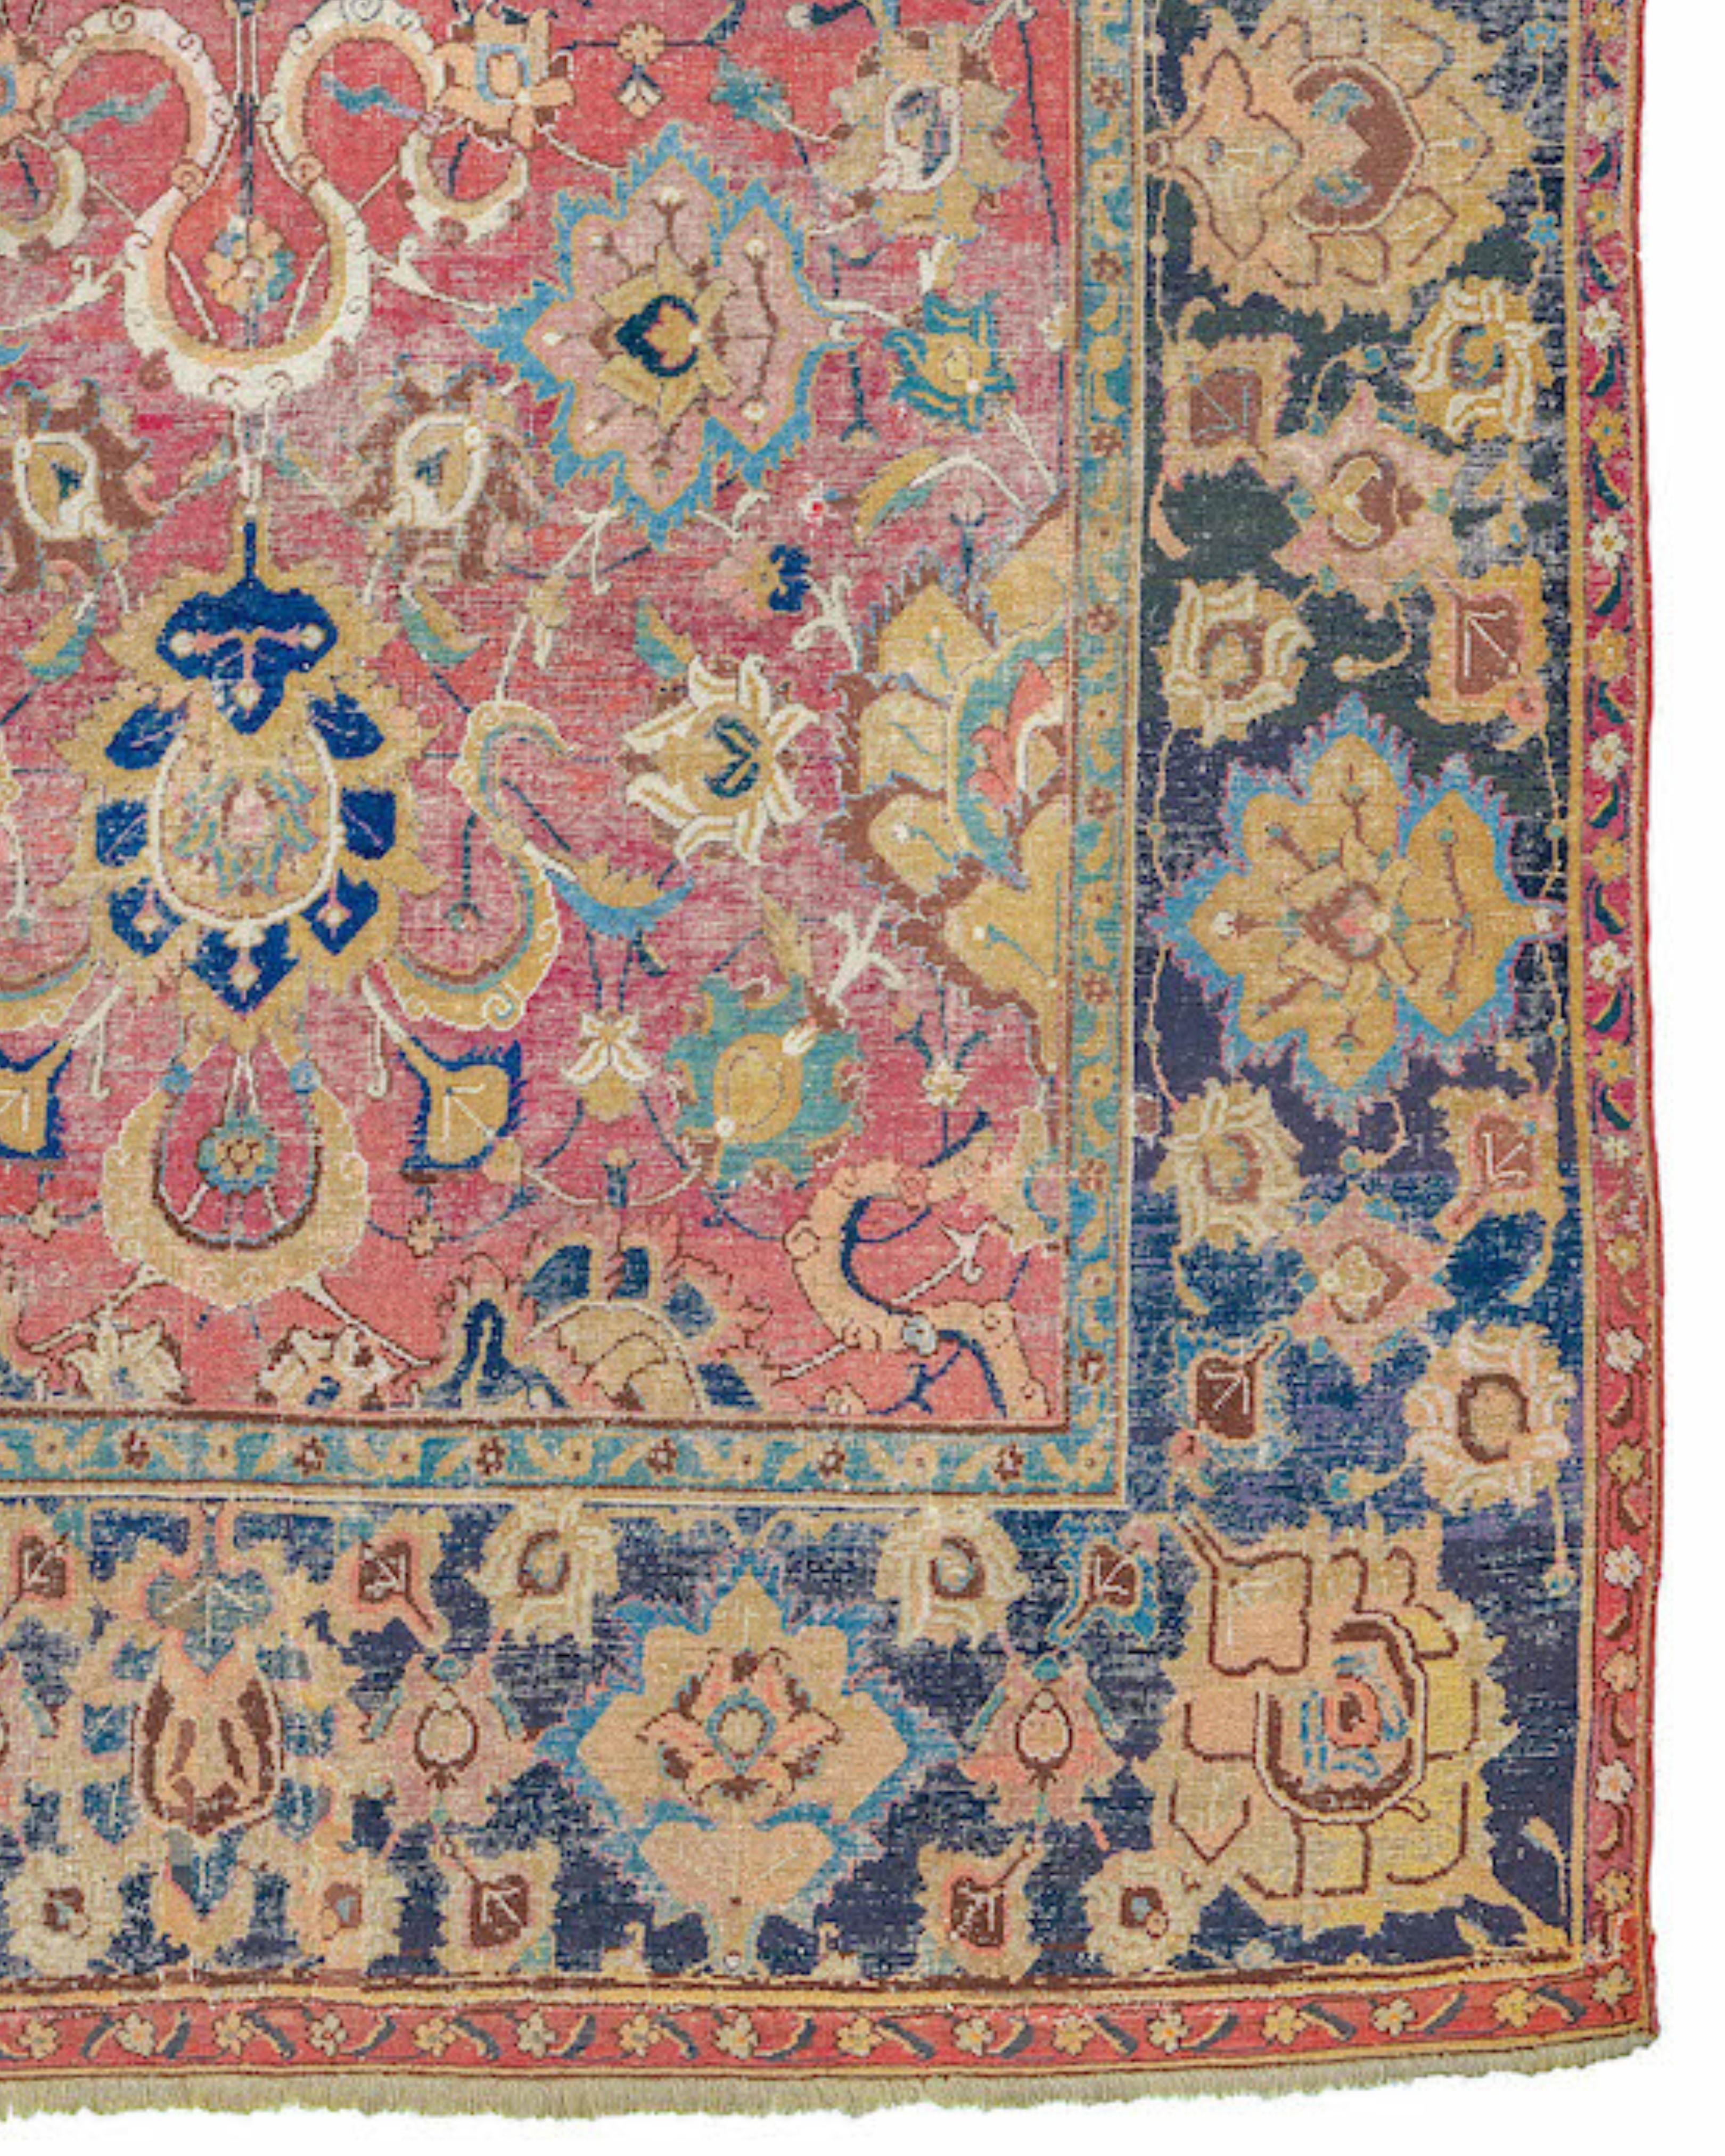 Antique Indo-Isfahan Long Rug, 17th Century

Throughout the 17th century, Persian modes and models played a vital role in the development of the arts in India. Persian artists, craftsmen, and poets readily found patronage at the Mughal court and